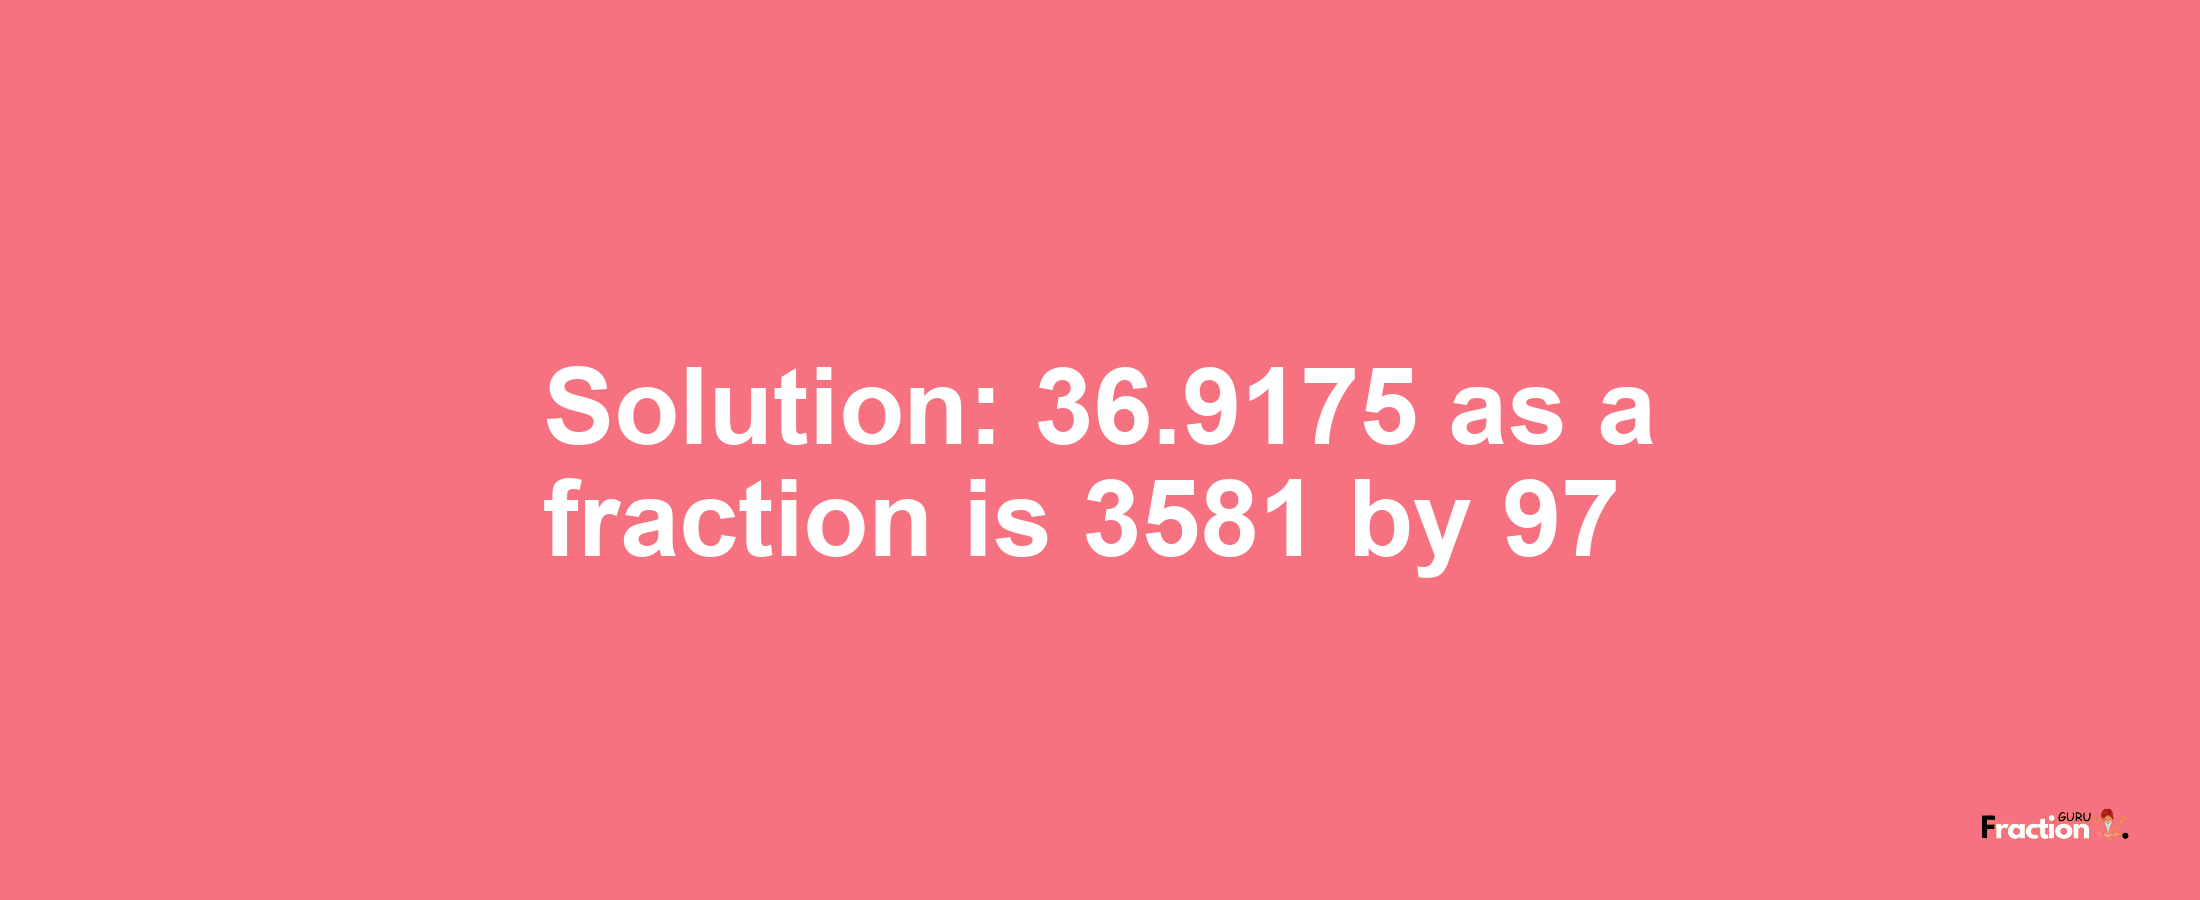 Solution:36.9175 as a fraction is 3581/97